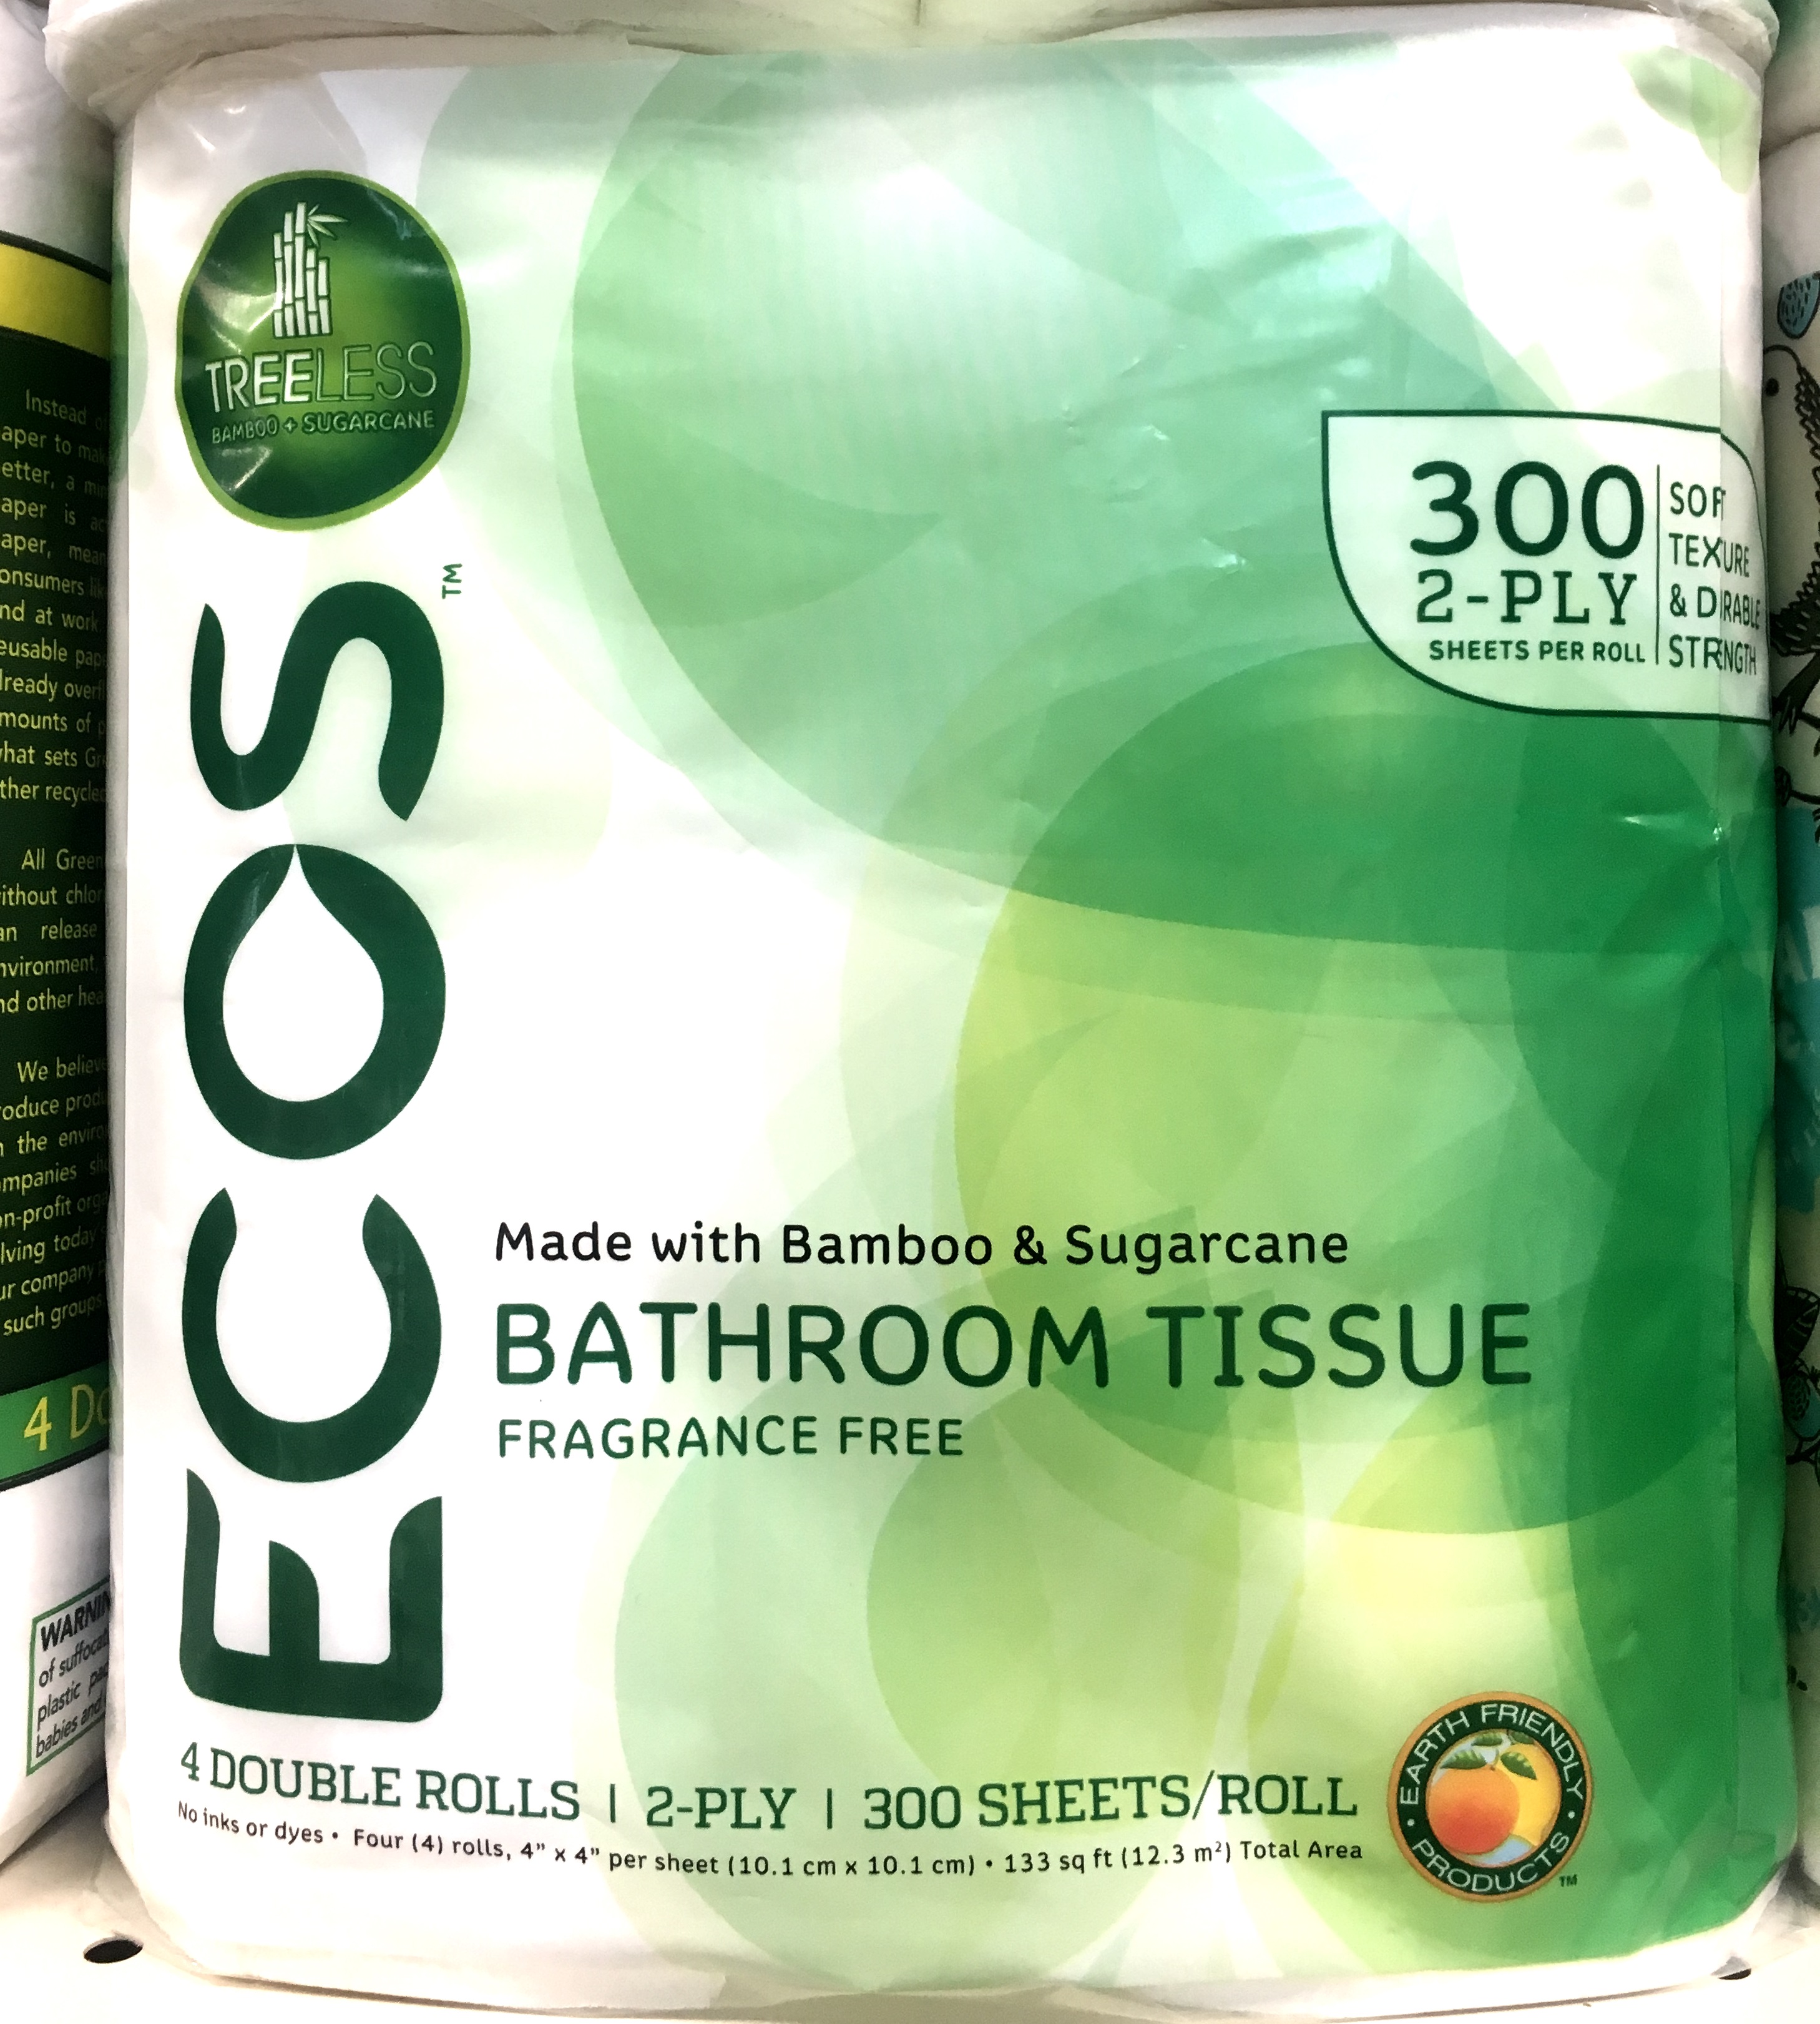 Bamboo-derived toilet paper